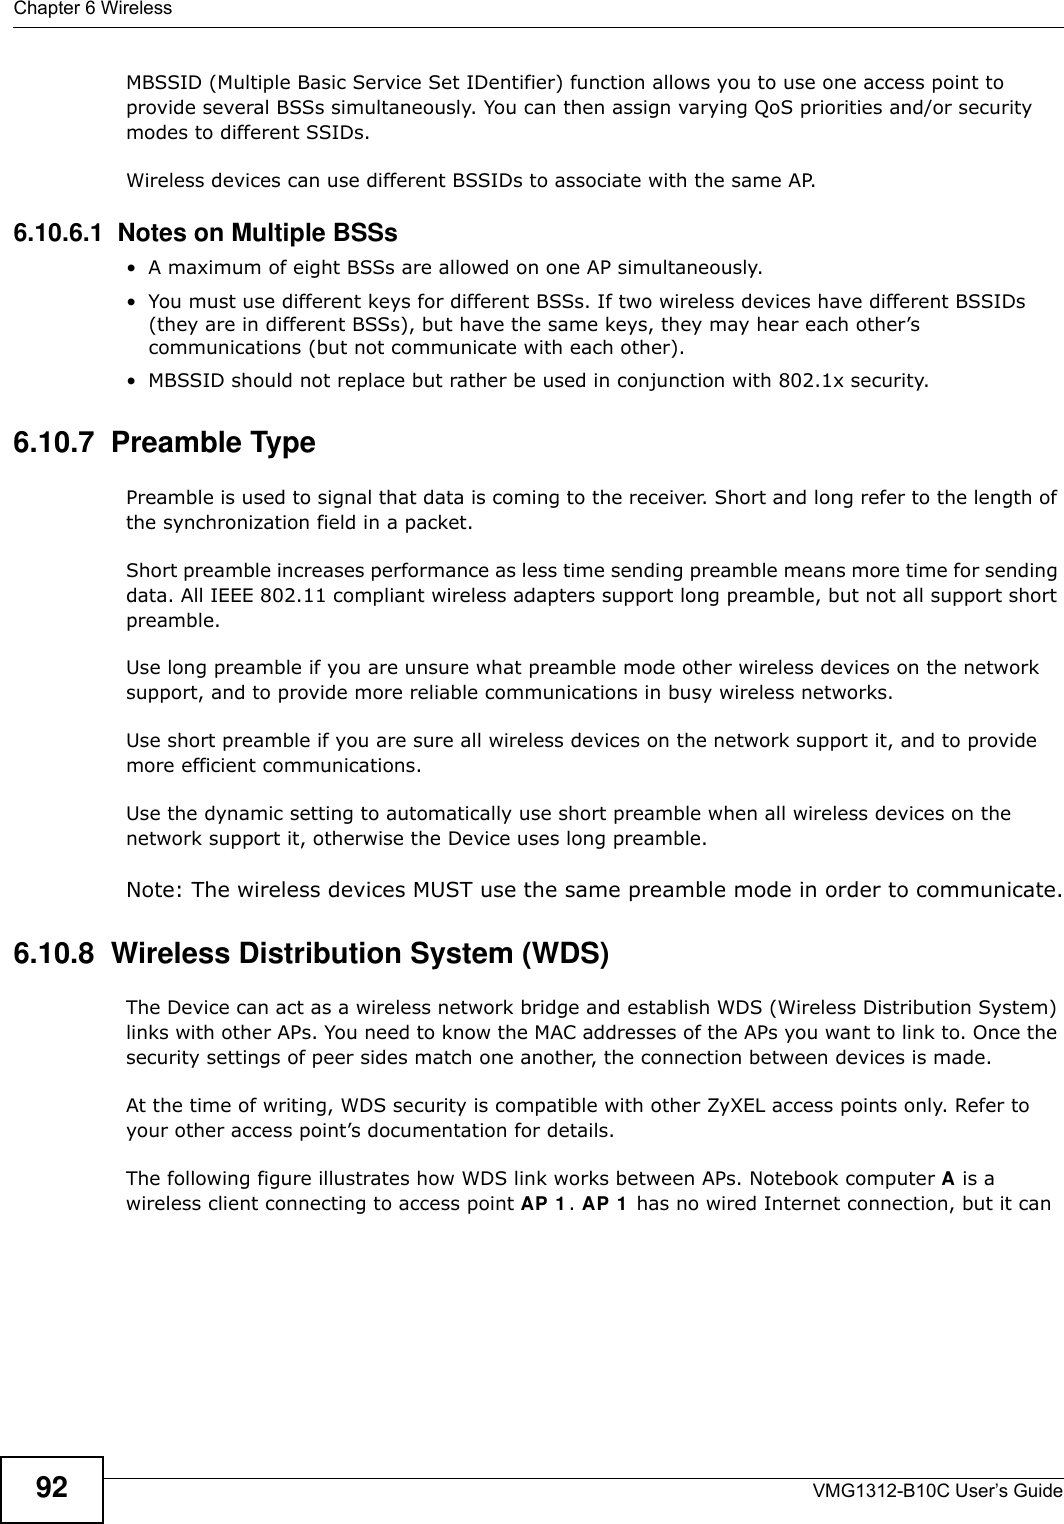 Chapter 6 WirelessVMG1312-B10C User’s Guide92MBSSID (Multiple Basic Service Set IDentifier) function allows you to use one access point to provide several BSSs simultaneously. You can then assign varying QoS priorities and/or security modes to different SSIDs.Wireless devices can use different BSSIDs to associate with the same AP.6.10.6.1  Notes on Multiple BSSs• A maximum of eight BSSs are allowed on one AP simultaneously.• You must use different keys for different BSSs. If two wireless devices have different BSSIDs (they are in different BSSs), but have the same keys, they may hear each other’s communications (but not communicate with each other).• MBSSID should not replace but rather be used in conjunction with 802.1x security.6.10.7  Preamble TypePreamble is used to signal that data is coming to the receiver. Short and long refer to the length of the synchronization field in a packet.Short preamble increases performance as less time sending preamble means more time for sending data. All IEEE 802.11 compliant wireless adapters support long preamble, but not all support short preamble. Use long preamble if you are unsure what preamble mode other wireless devices on the network support, and to provide more reliable communications in busy wireless networks. Use short preamble if you are sure all wireless devices on the network support it, and to provide more efficient communications.Use the dynamic setting to automatically use short preamble when all wireless devices on the network support it, otherwise the Device uses long preamble.Note: The wireless devices MUST use the same preamble mode in order to communicate.6.10.8  Wireless Distribution System (WDS)The Device can act as a wireless network bridge and establish WDS (Wireless Distribution System) links with other APs. You need to know the MAC addresses of the APs you want to link to. Once the security settings of peer sides match one another, the connection between devices is made.At the time of writing, WDS security is compatible with other ZyXEL access points only. Refer to your other access point’s documentation for details.The following figure illustrates how WDS link works between APs. Notebook computer A is a wireless client connecting to access point AP 1 . AP 1  has no wired Internet connection, but it can 